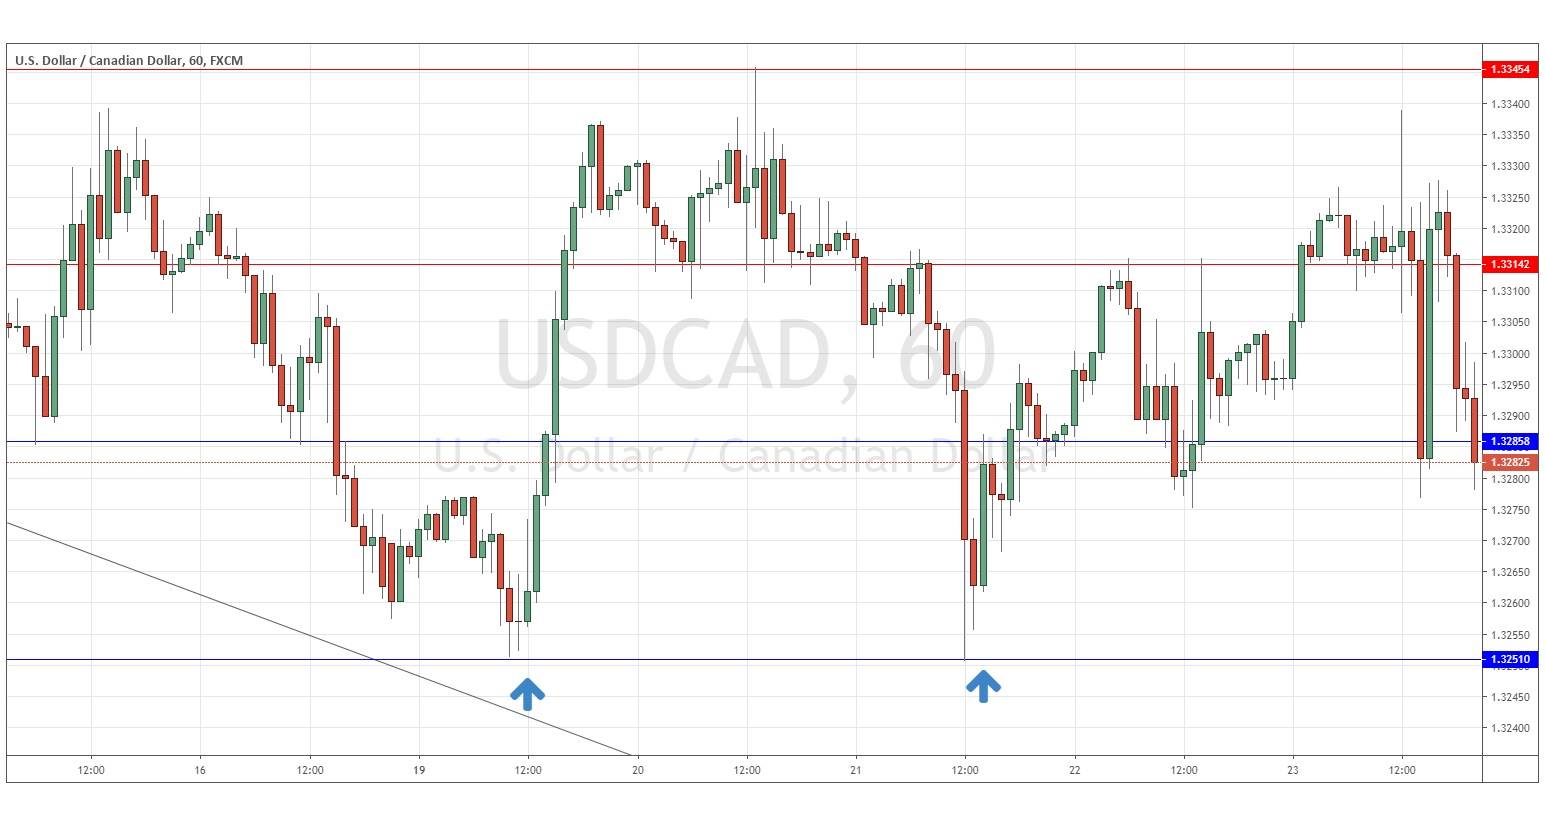 USD / CAD support and resistance